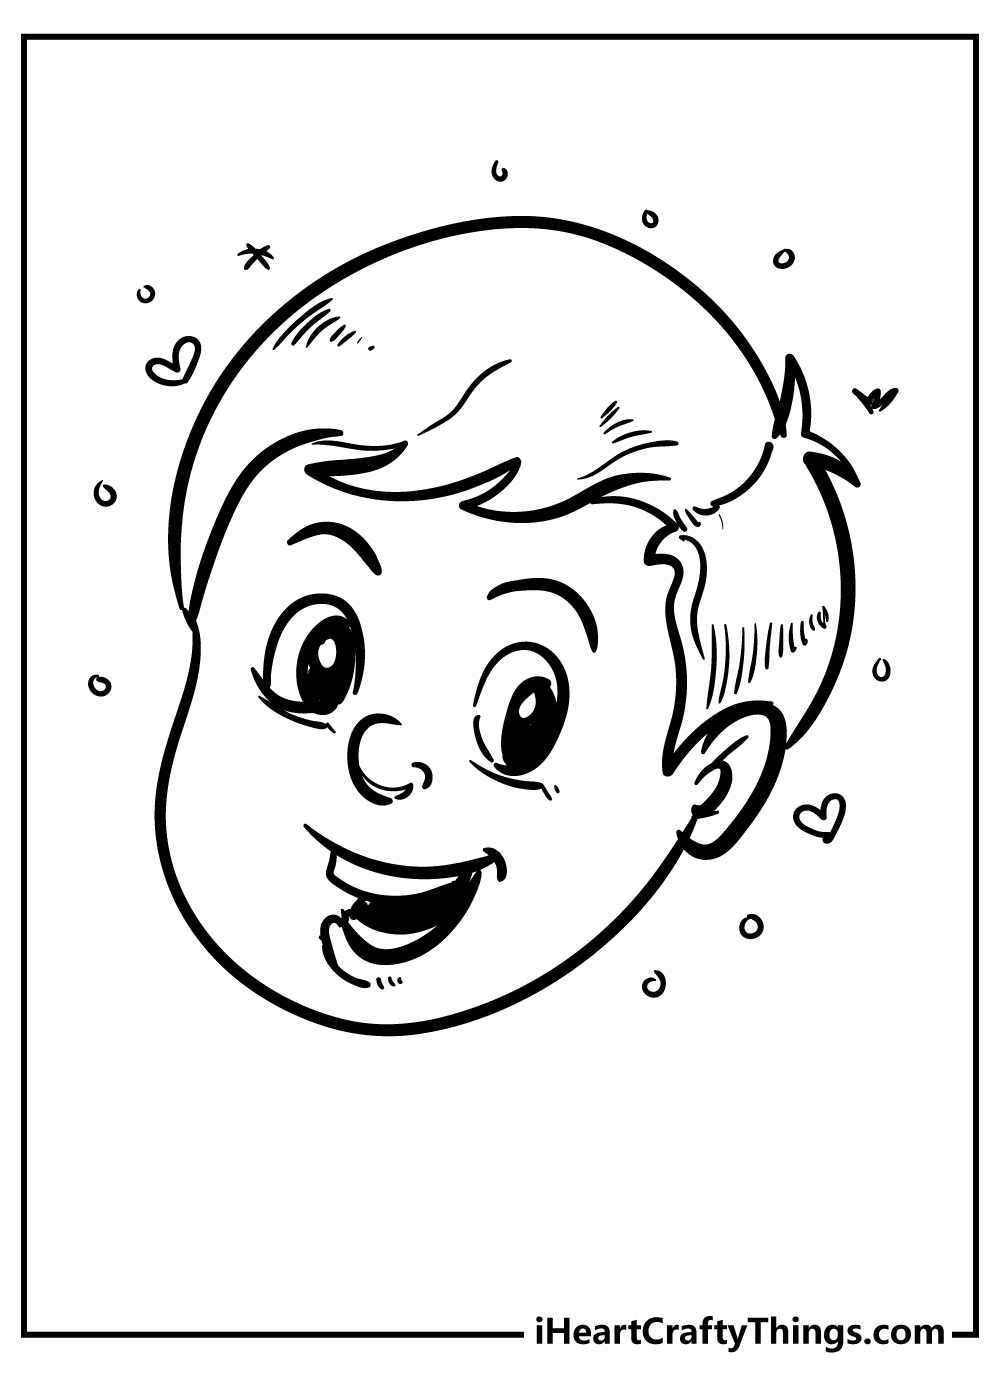 Happy Coloring Pages for adults free printable